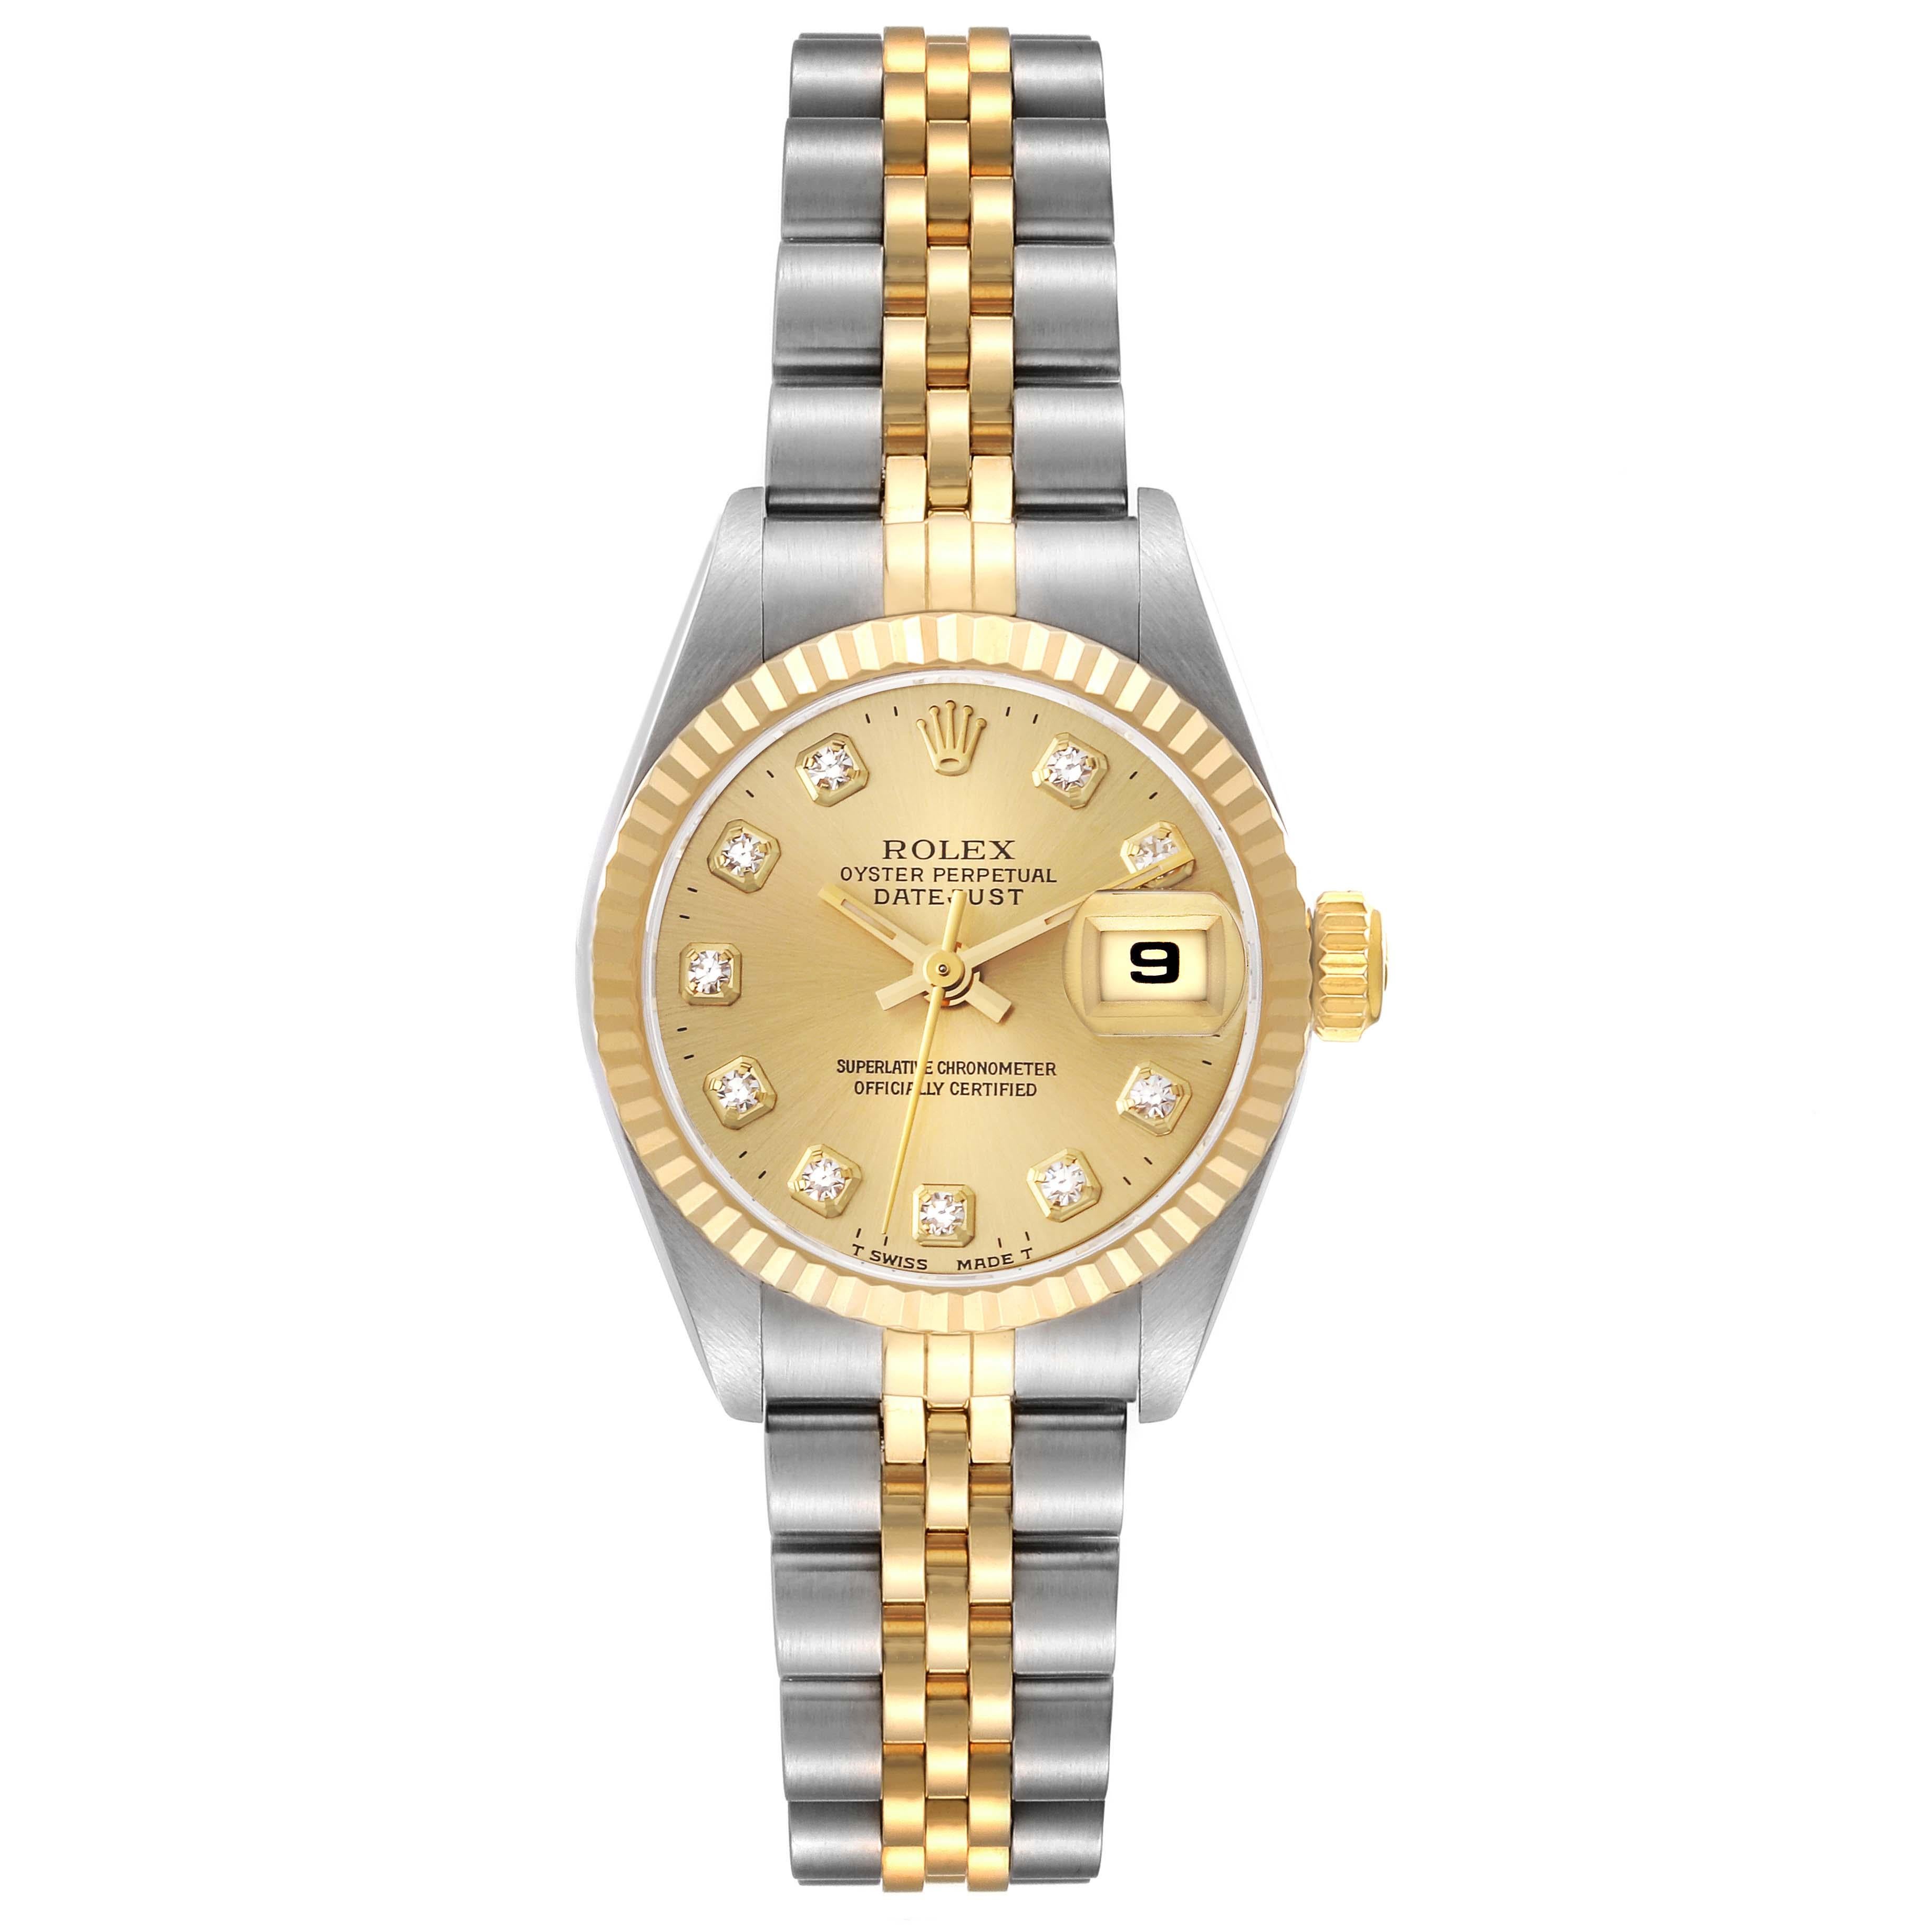 Rolex Datejust Steel Yellow Gold Diamond Dial Ladies Watch 69173 Box Papers. Officially certified chronometer automatic self-winding movement. Stainless steel oyster case 26.0 mm in diameter. Rolex logo on the crown. 18k yellow gold fluted bezel.